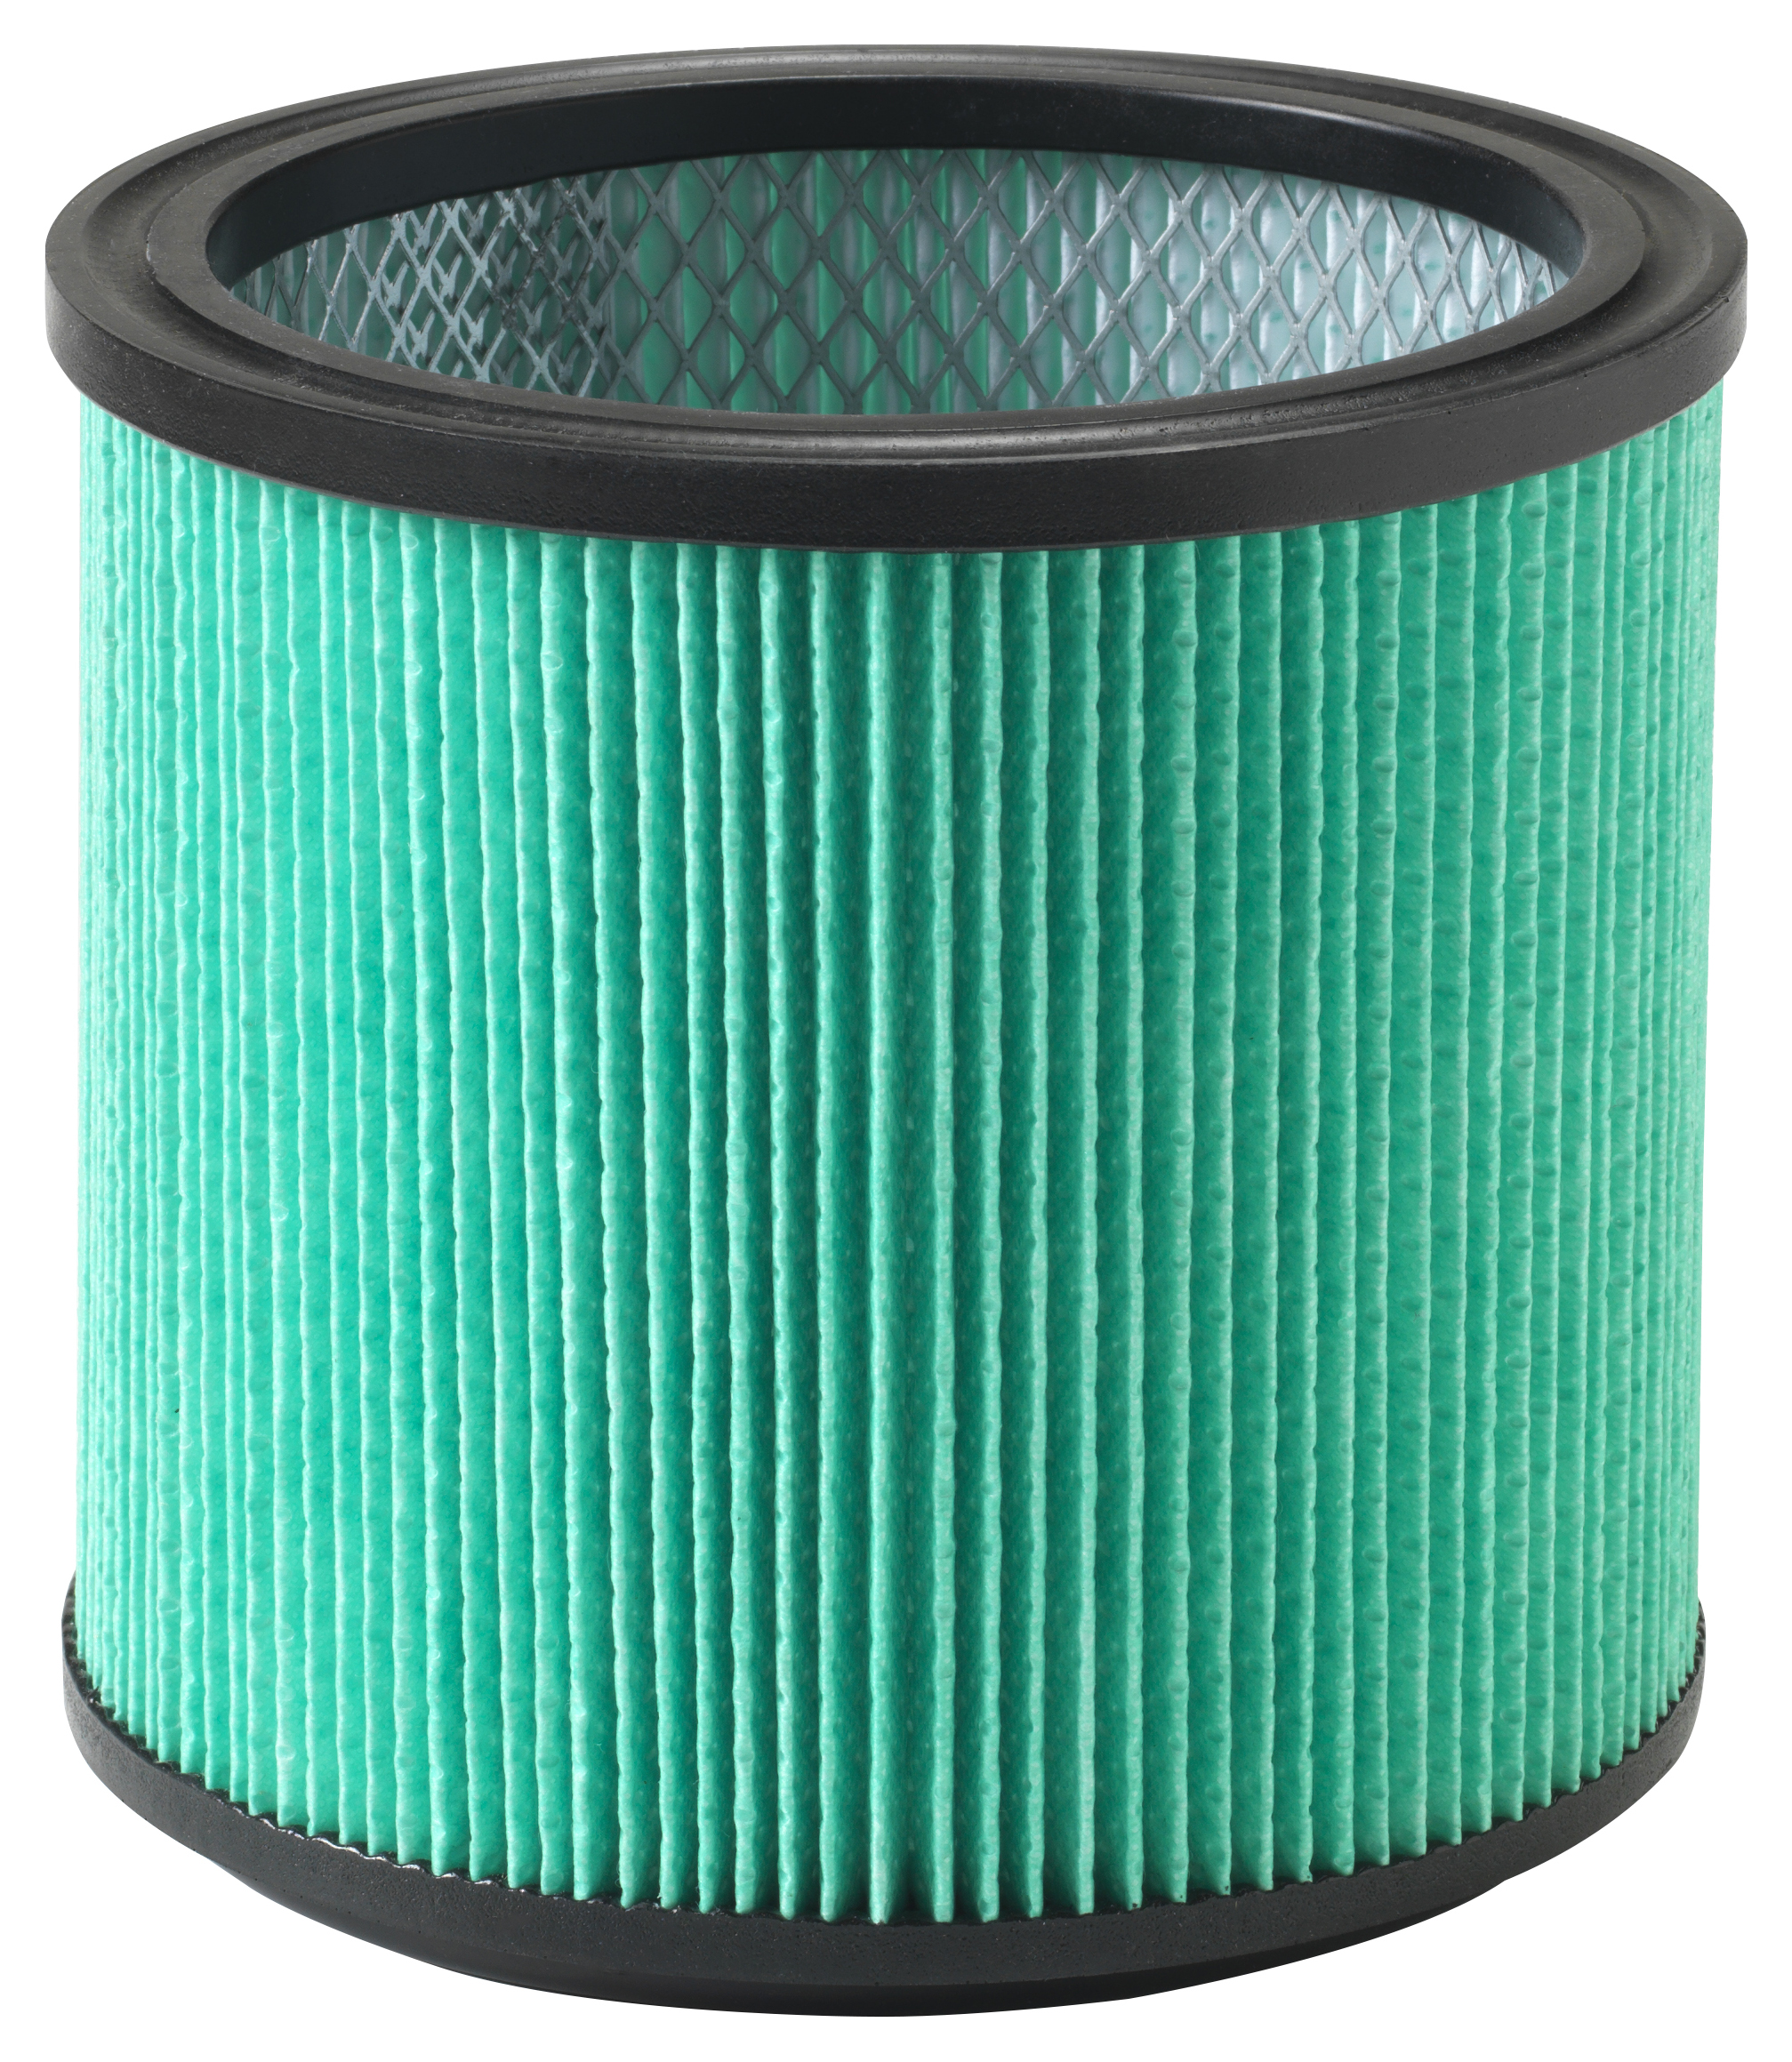 Vacmaster 951316 Universal HEPA H13 Cartridge Filter for 15L - 60L Wet & Dry Vacuum Cleaners